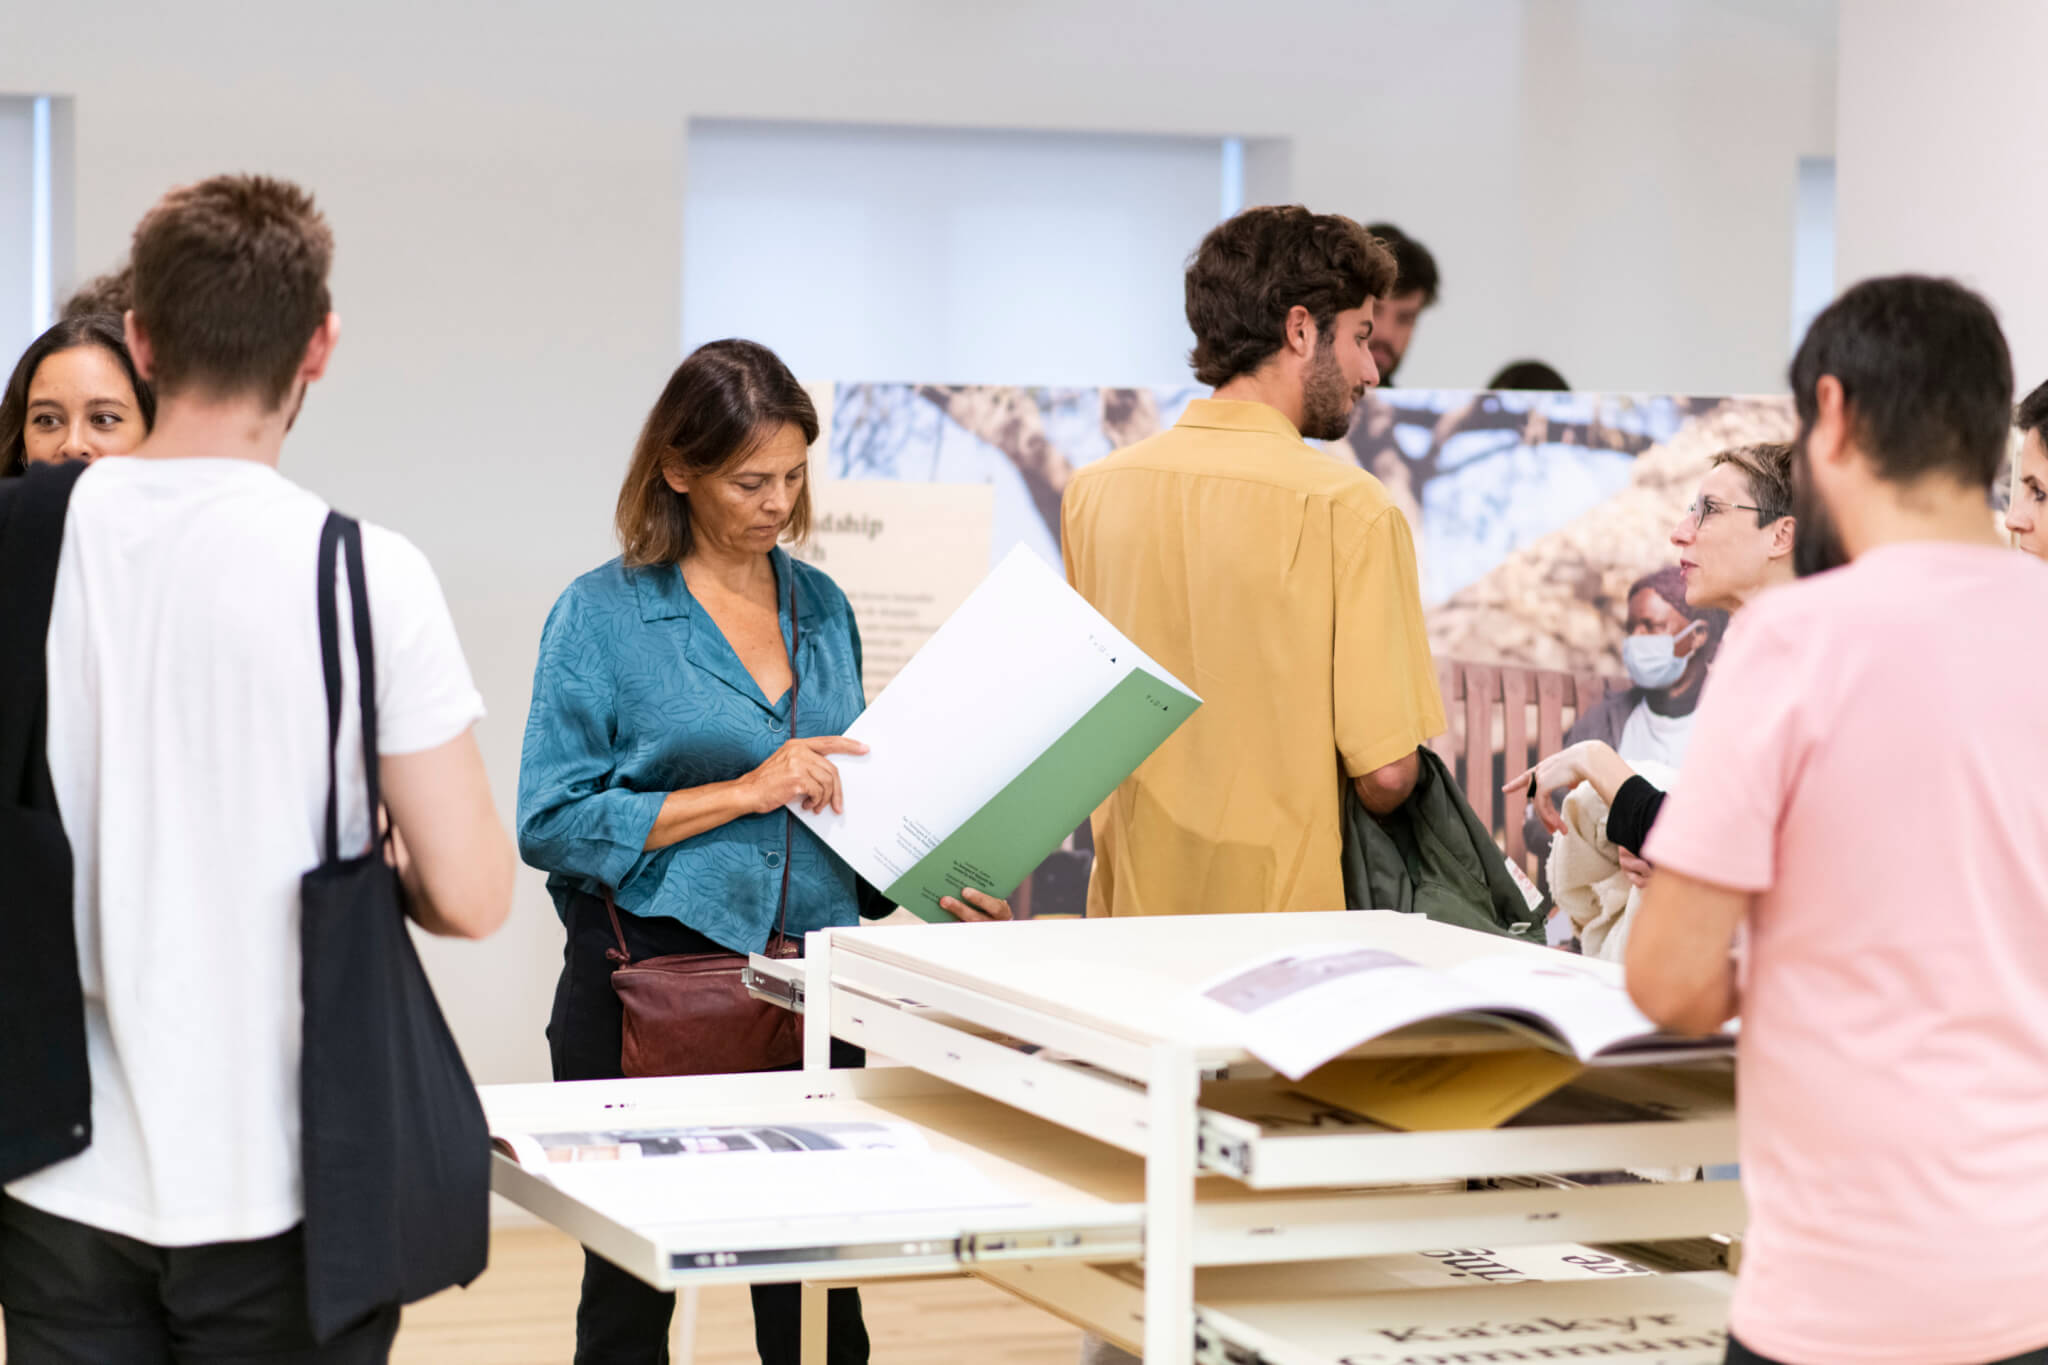 people viewing documents in exhibition